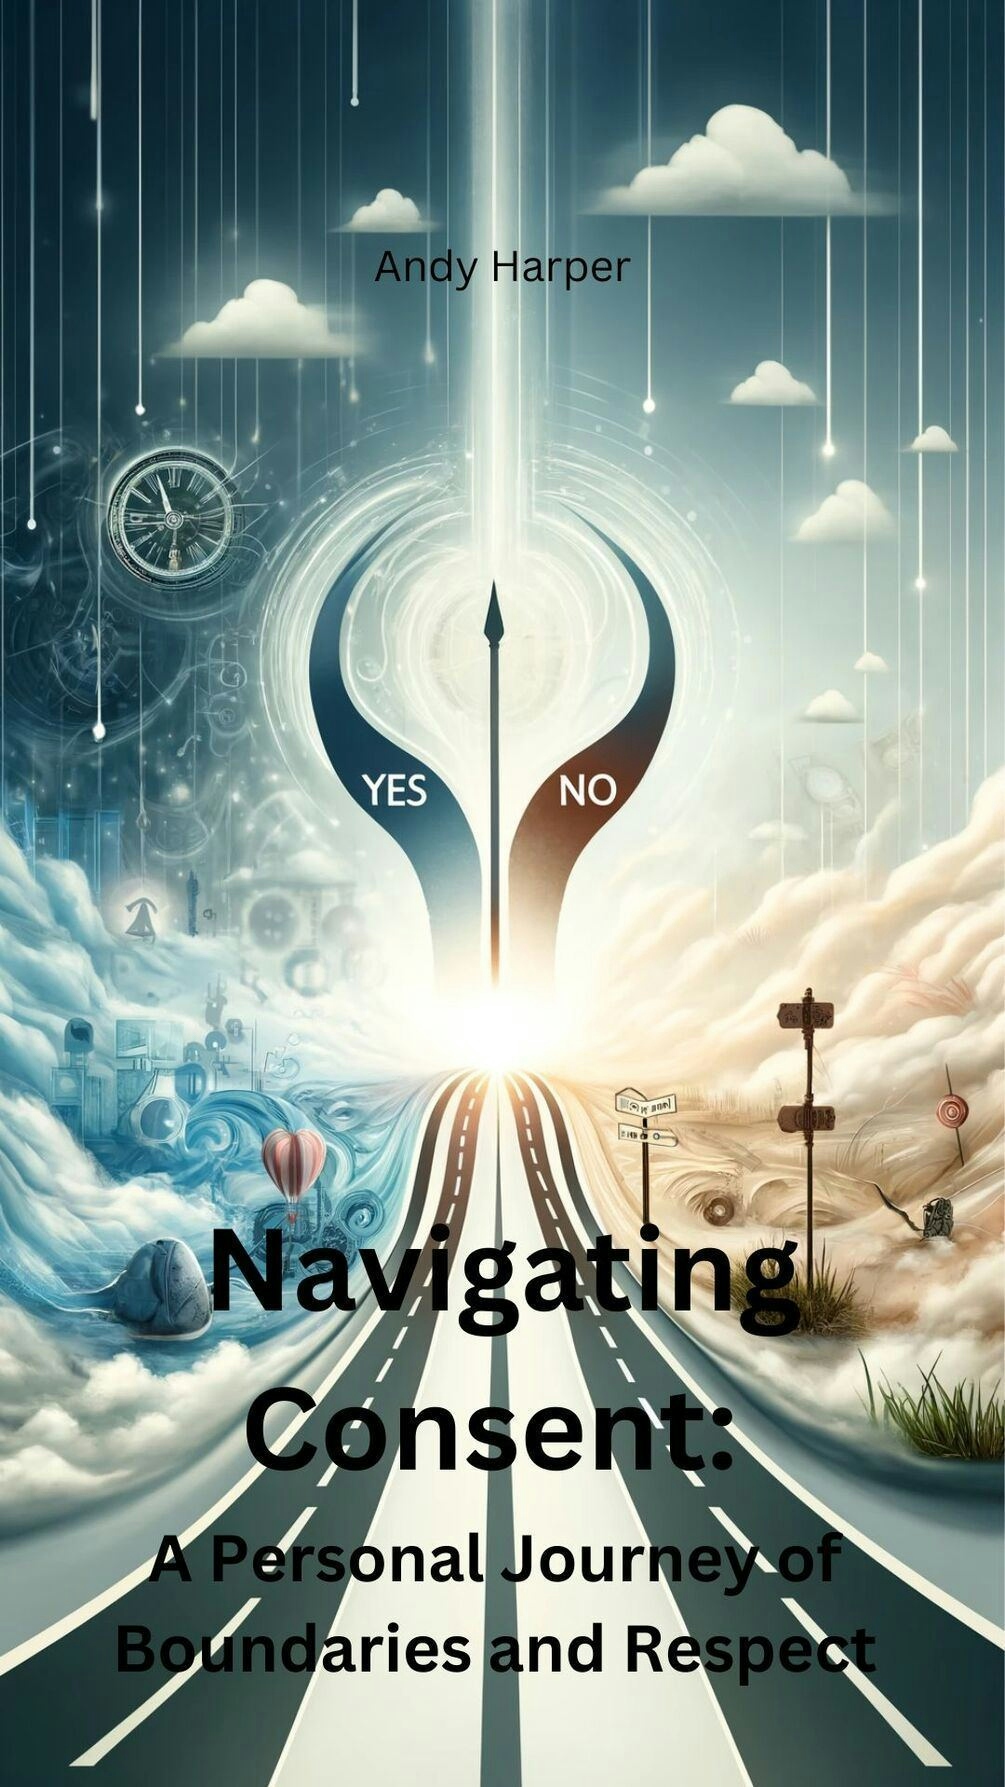 Navigating Consent: A Journey of Boundaries and Respect by Samson Harper